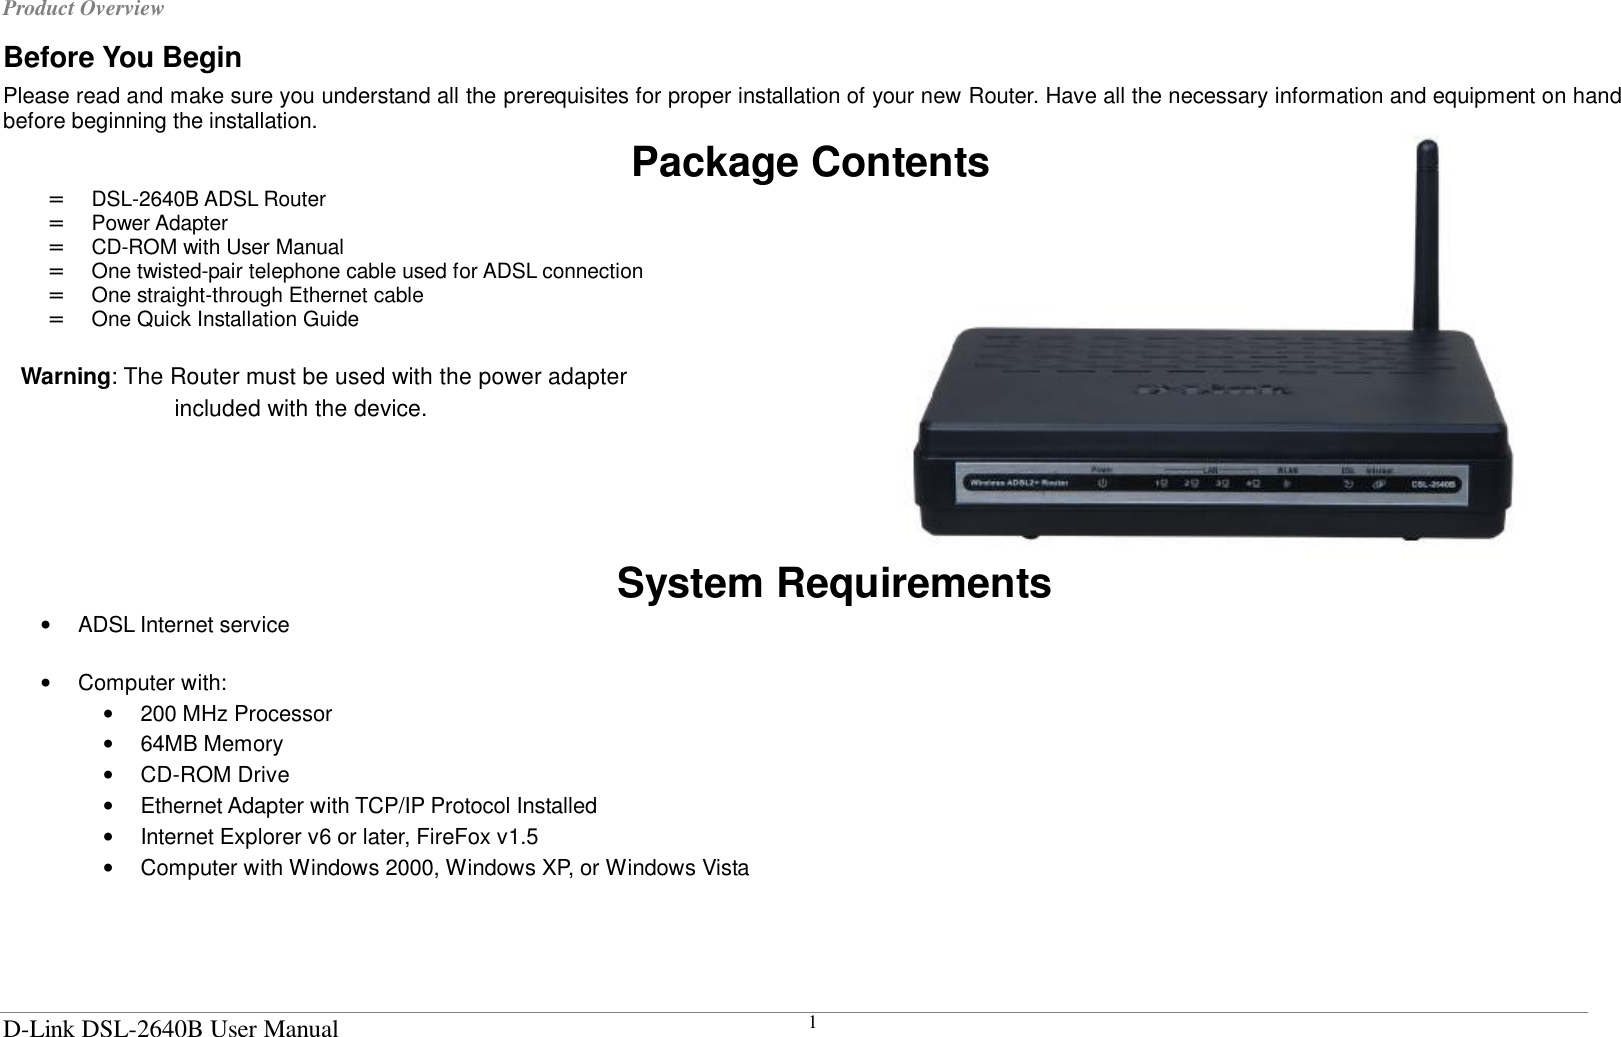 Product Overview  D-Link DSL-2640B User Manual 1 Before You Begin Please read and make sure you understand all the prerequisites for proper installation of your new Router. Have all the necessary information and equipment on hand before beginning the installation. Package Contents =  DSL-2640B ADSL Router =  Power Adapter =  CD-ROM with User Manual =  One twisted-pair telephone cable used for ADSL connection =  One straight-through Ethernet cable =  One Quick Installation Guide  Warning: The Router must be used with the power adapter included with the device.     System Requirements •  ADSL Internet service  •  Computer with: •  200 MHz Processor •  64MB Memory •  CD-ROM Drive •  Ethernet Adapter with TCP/IP Protocol Installed •  Internet Explorer v6 or later, FireFox v1.5 •  Computer with Windows 2000, Windows XP, or Windows Vista   